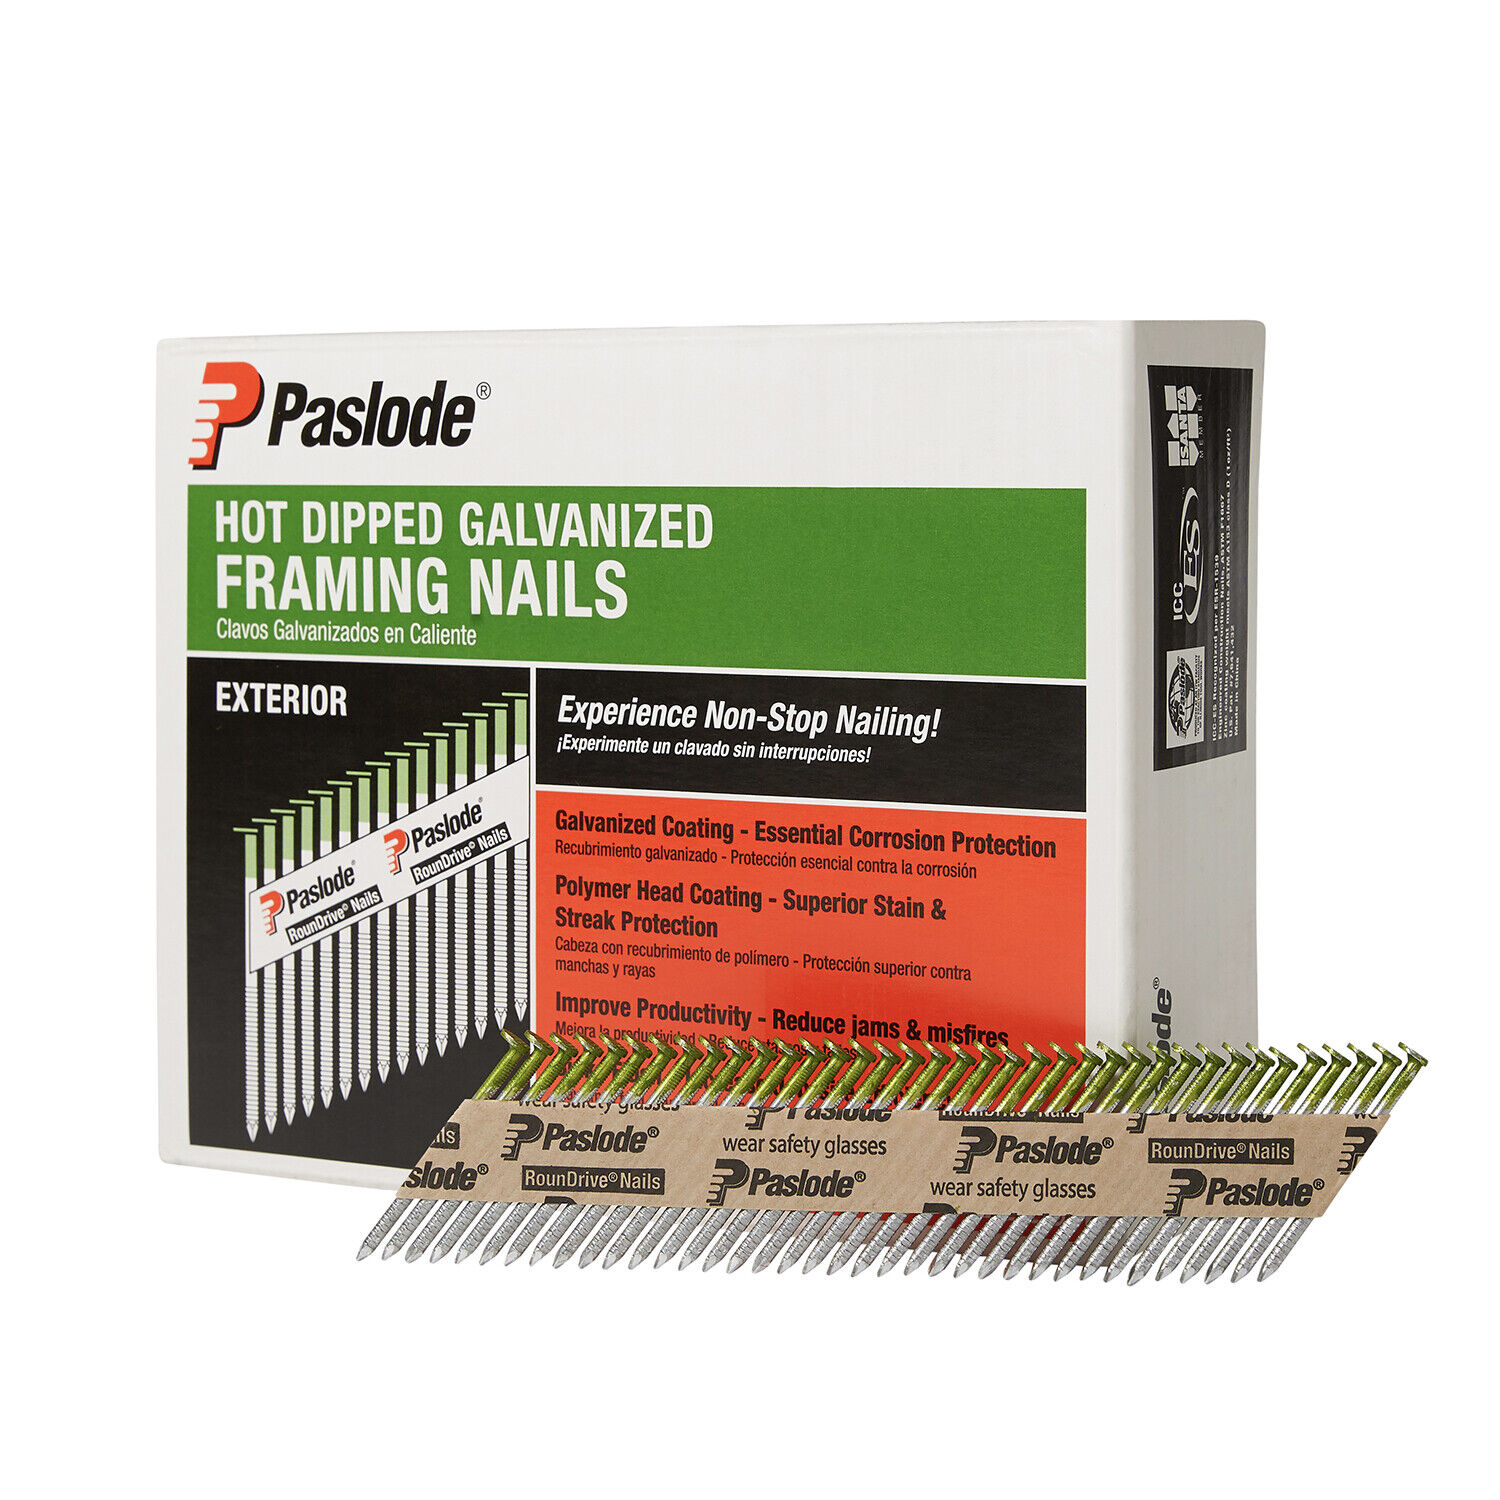 Paslode, Framing Nails, 650381, HDG 30 Degree Round Head, 2 inch x .113 Gauge